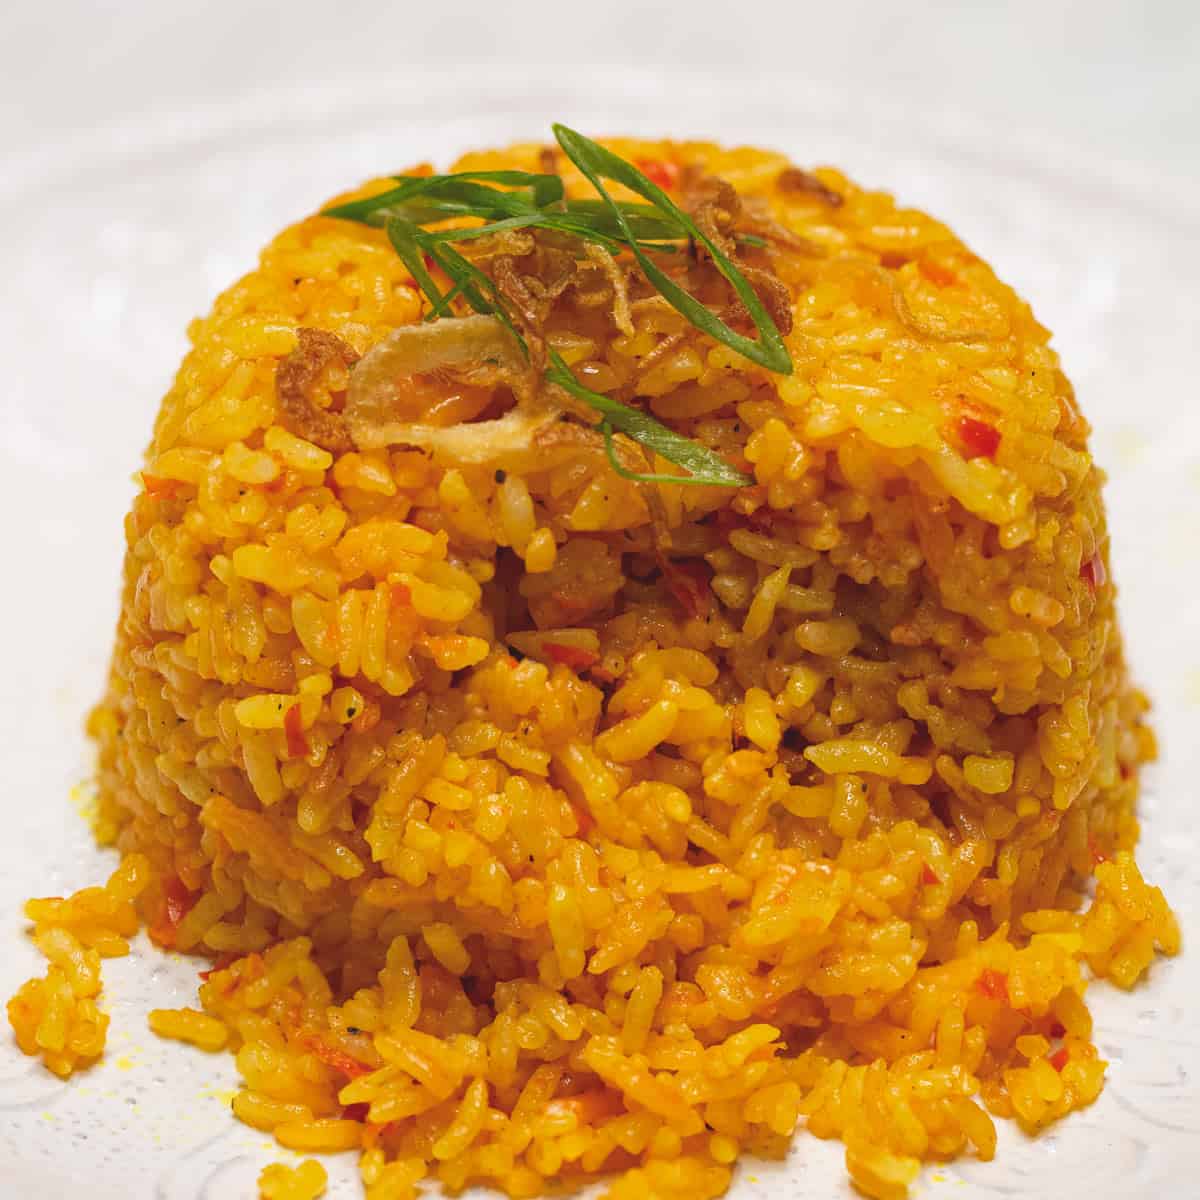 Java-rice-on-a-plate-featured-image.jpg